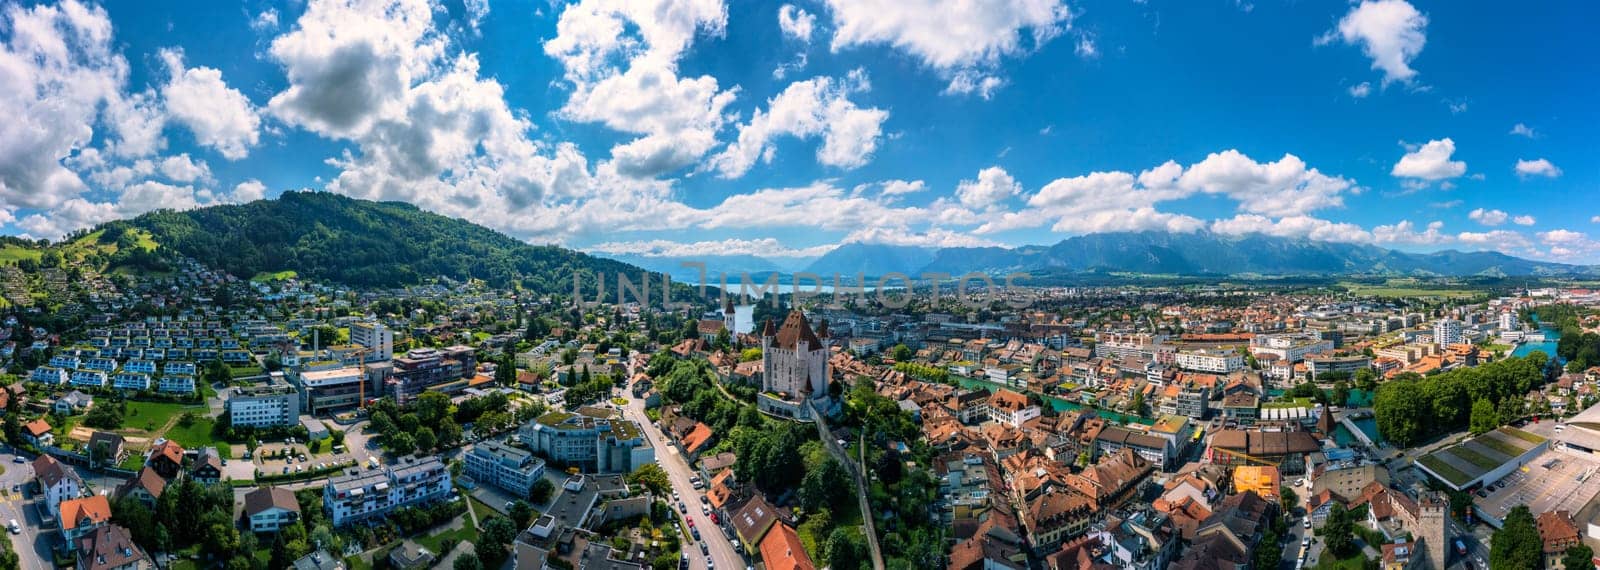 Panorama of Thun city with Alps and Thunersee lake, Switzerland. Historical Thun city and lake Thun with Bernese Highlands swiss Alps mountains in background, Canton Bern, Switzerland. by DaLiu